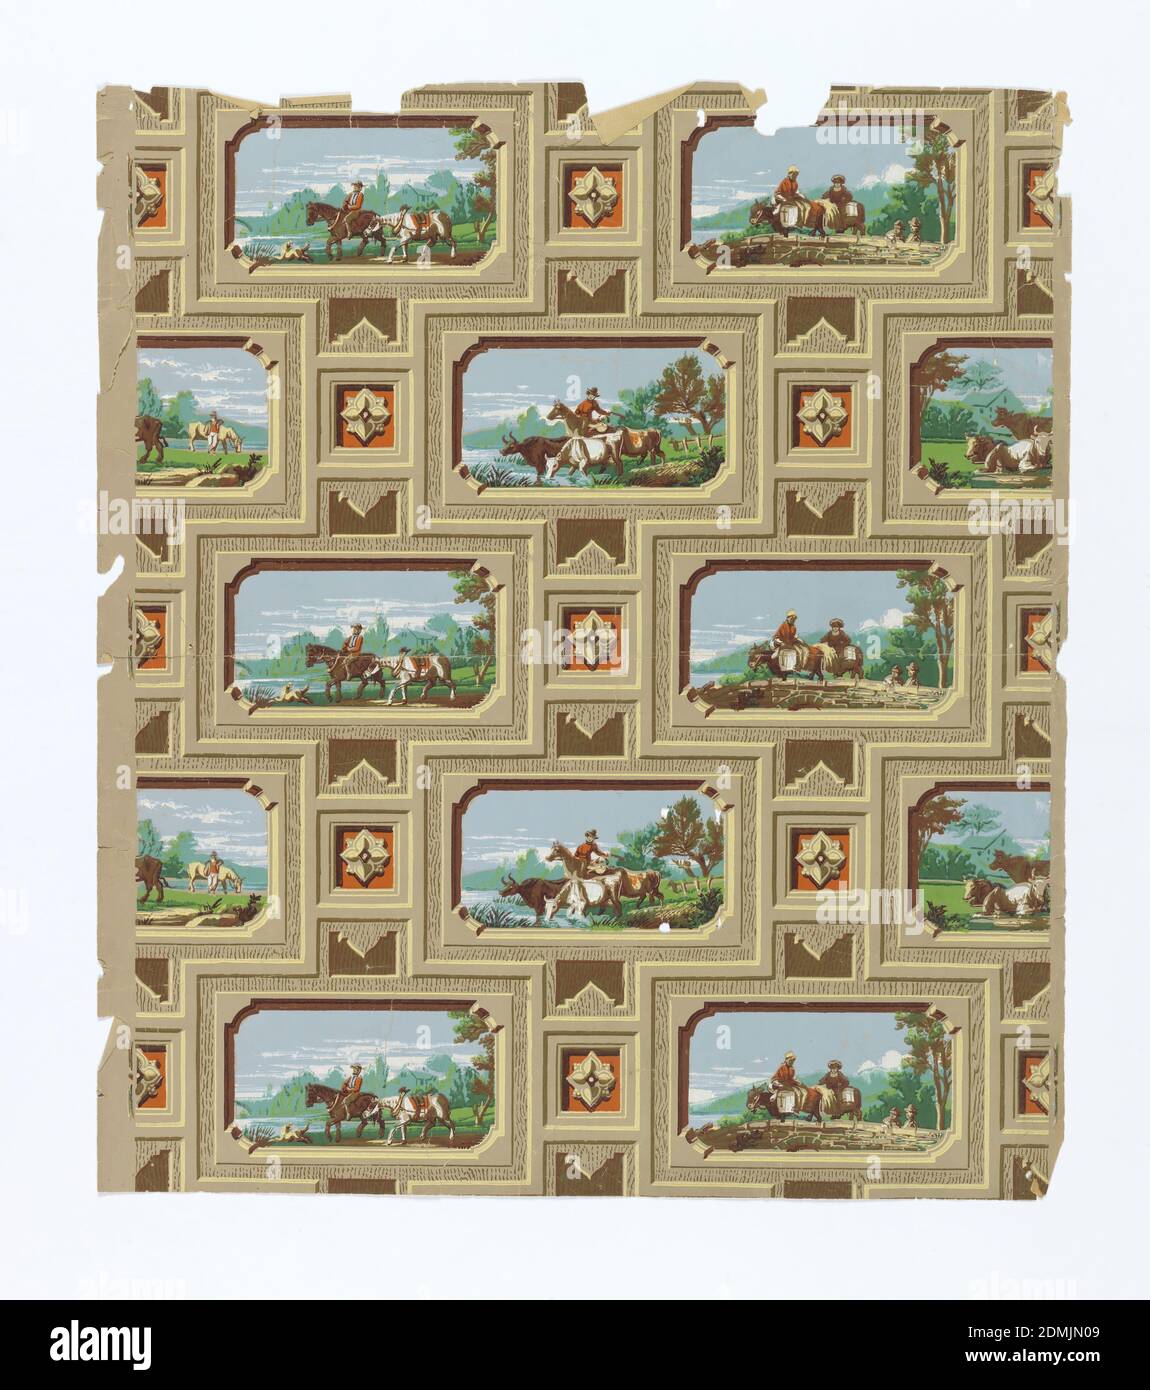 Sidewall, Machine-printed paper, Four alternating scenic vignettes of cowboys. Each image is printed on an inset panel within a brickwork-type construction. Motifs include horses, mules, peasants and steer. Each scene has mountains in the background and water in the foreground. Printed in blue, green, brown, orange, white and beige on tan wood grained background., England, ca. 1870, Wallcoverings, Sidewall Stock Photo